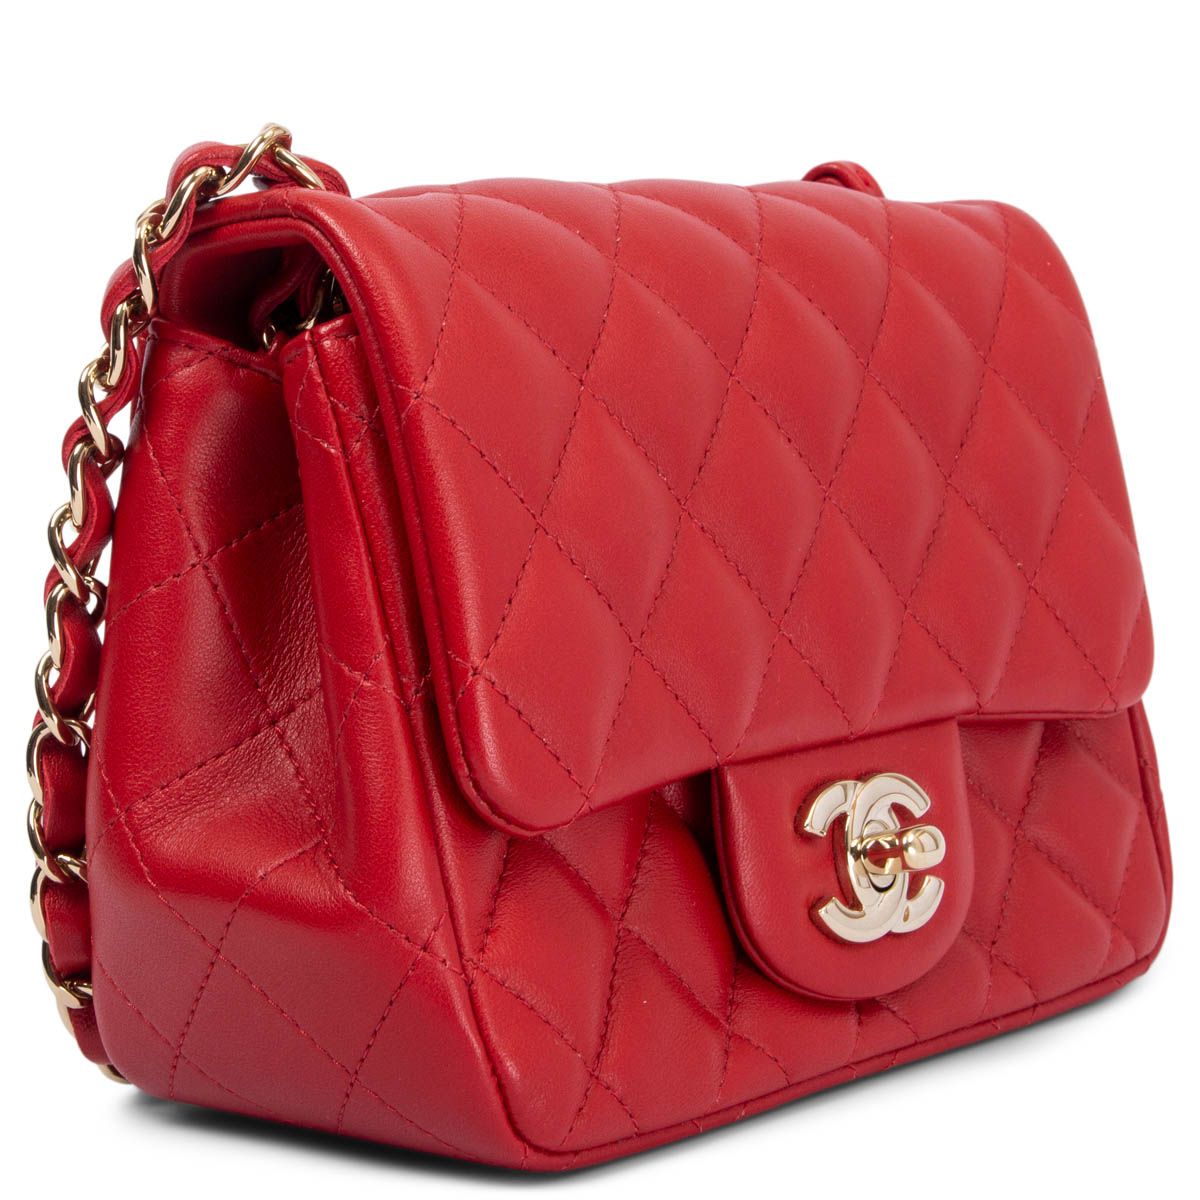 Chanel 2020 20S Mini Square Flap Shoulder Bag Red Quilted Leather